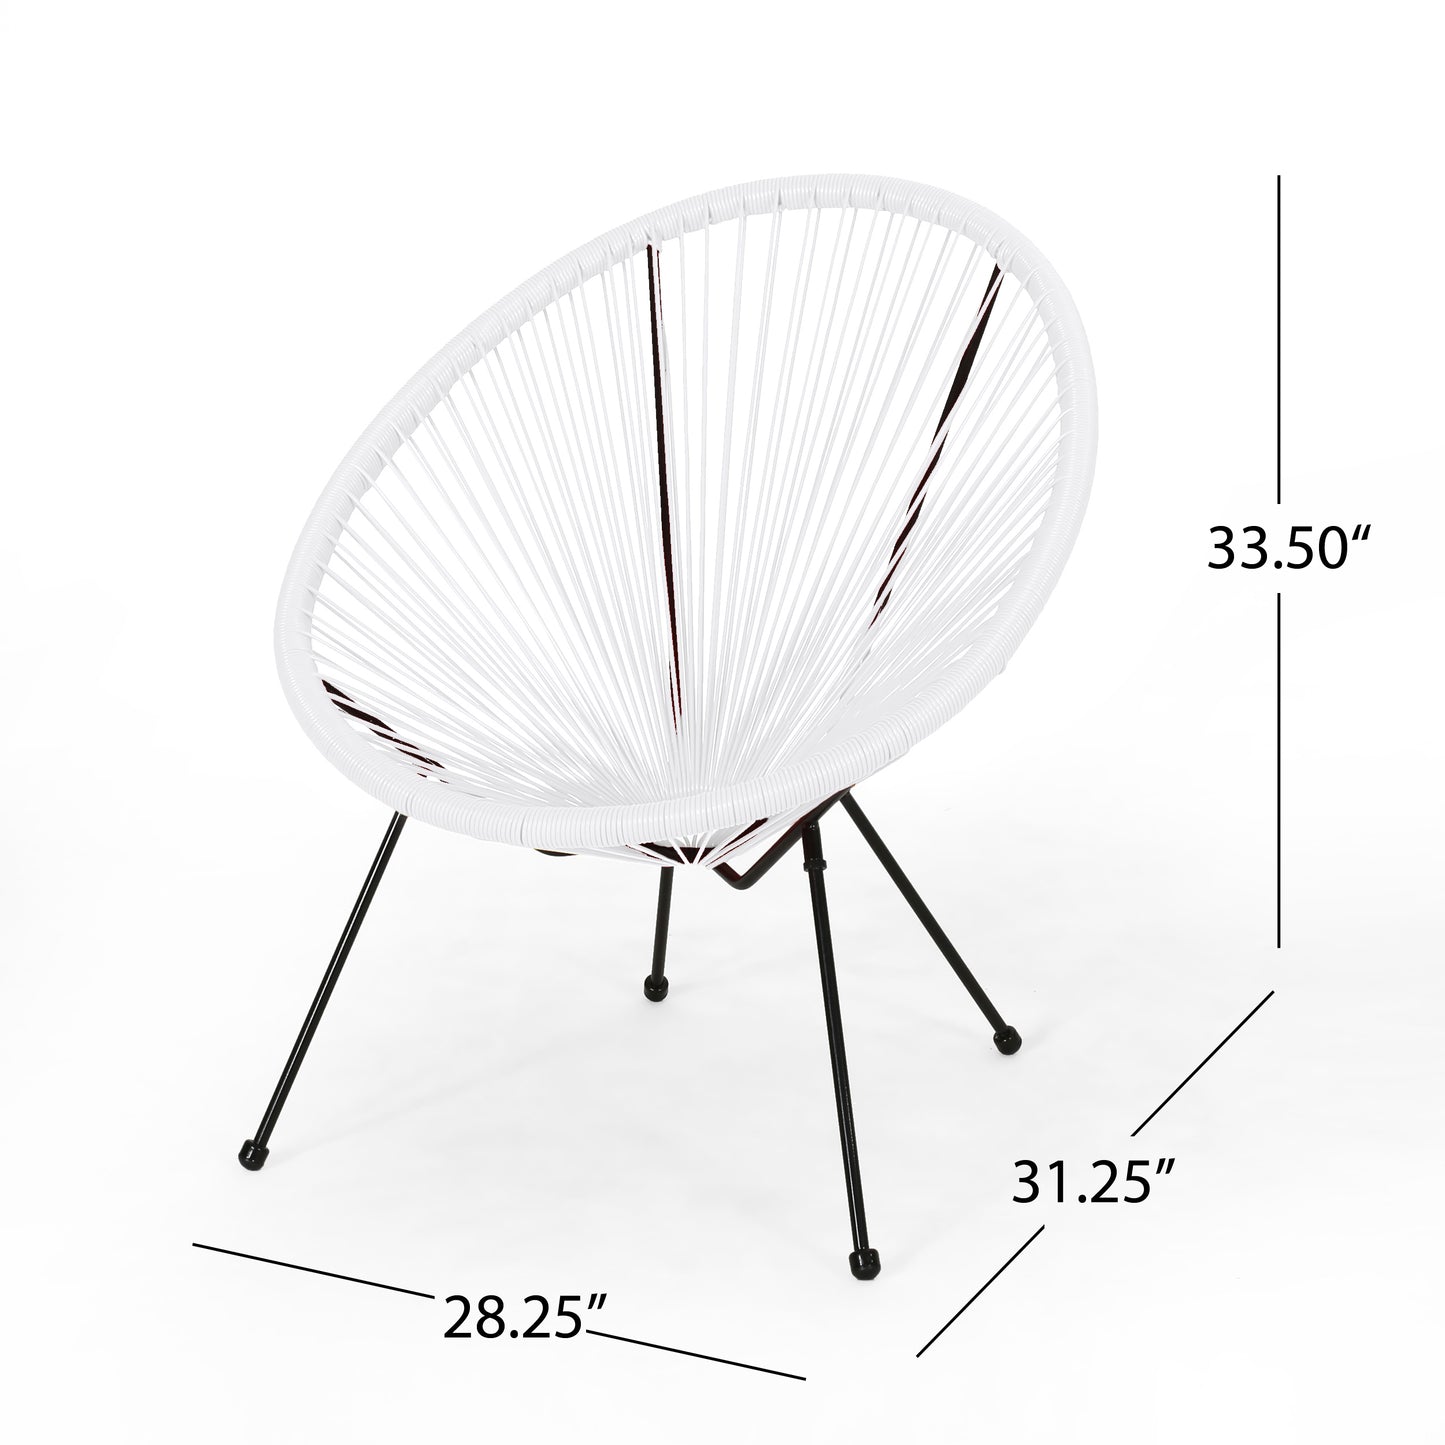 Sale Furniture Alexis Outdoor Woven Chair White+Black (Set of 2)